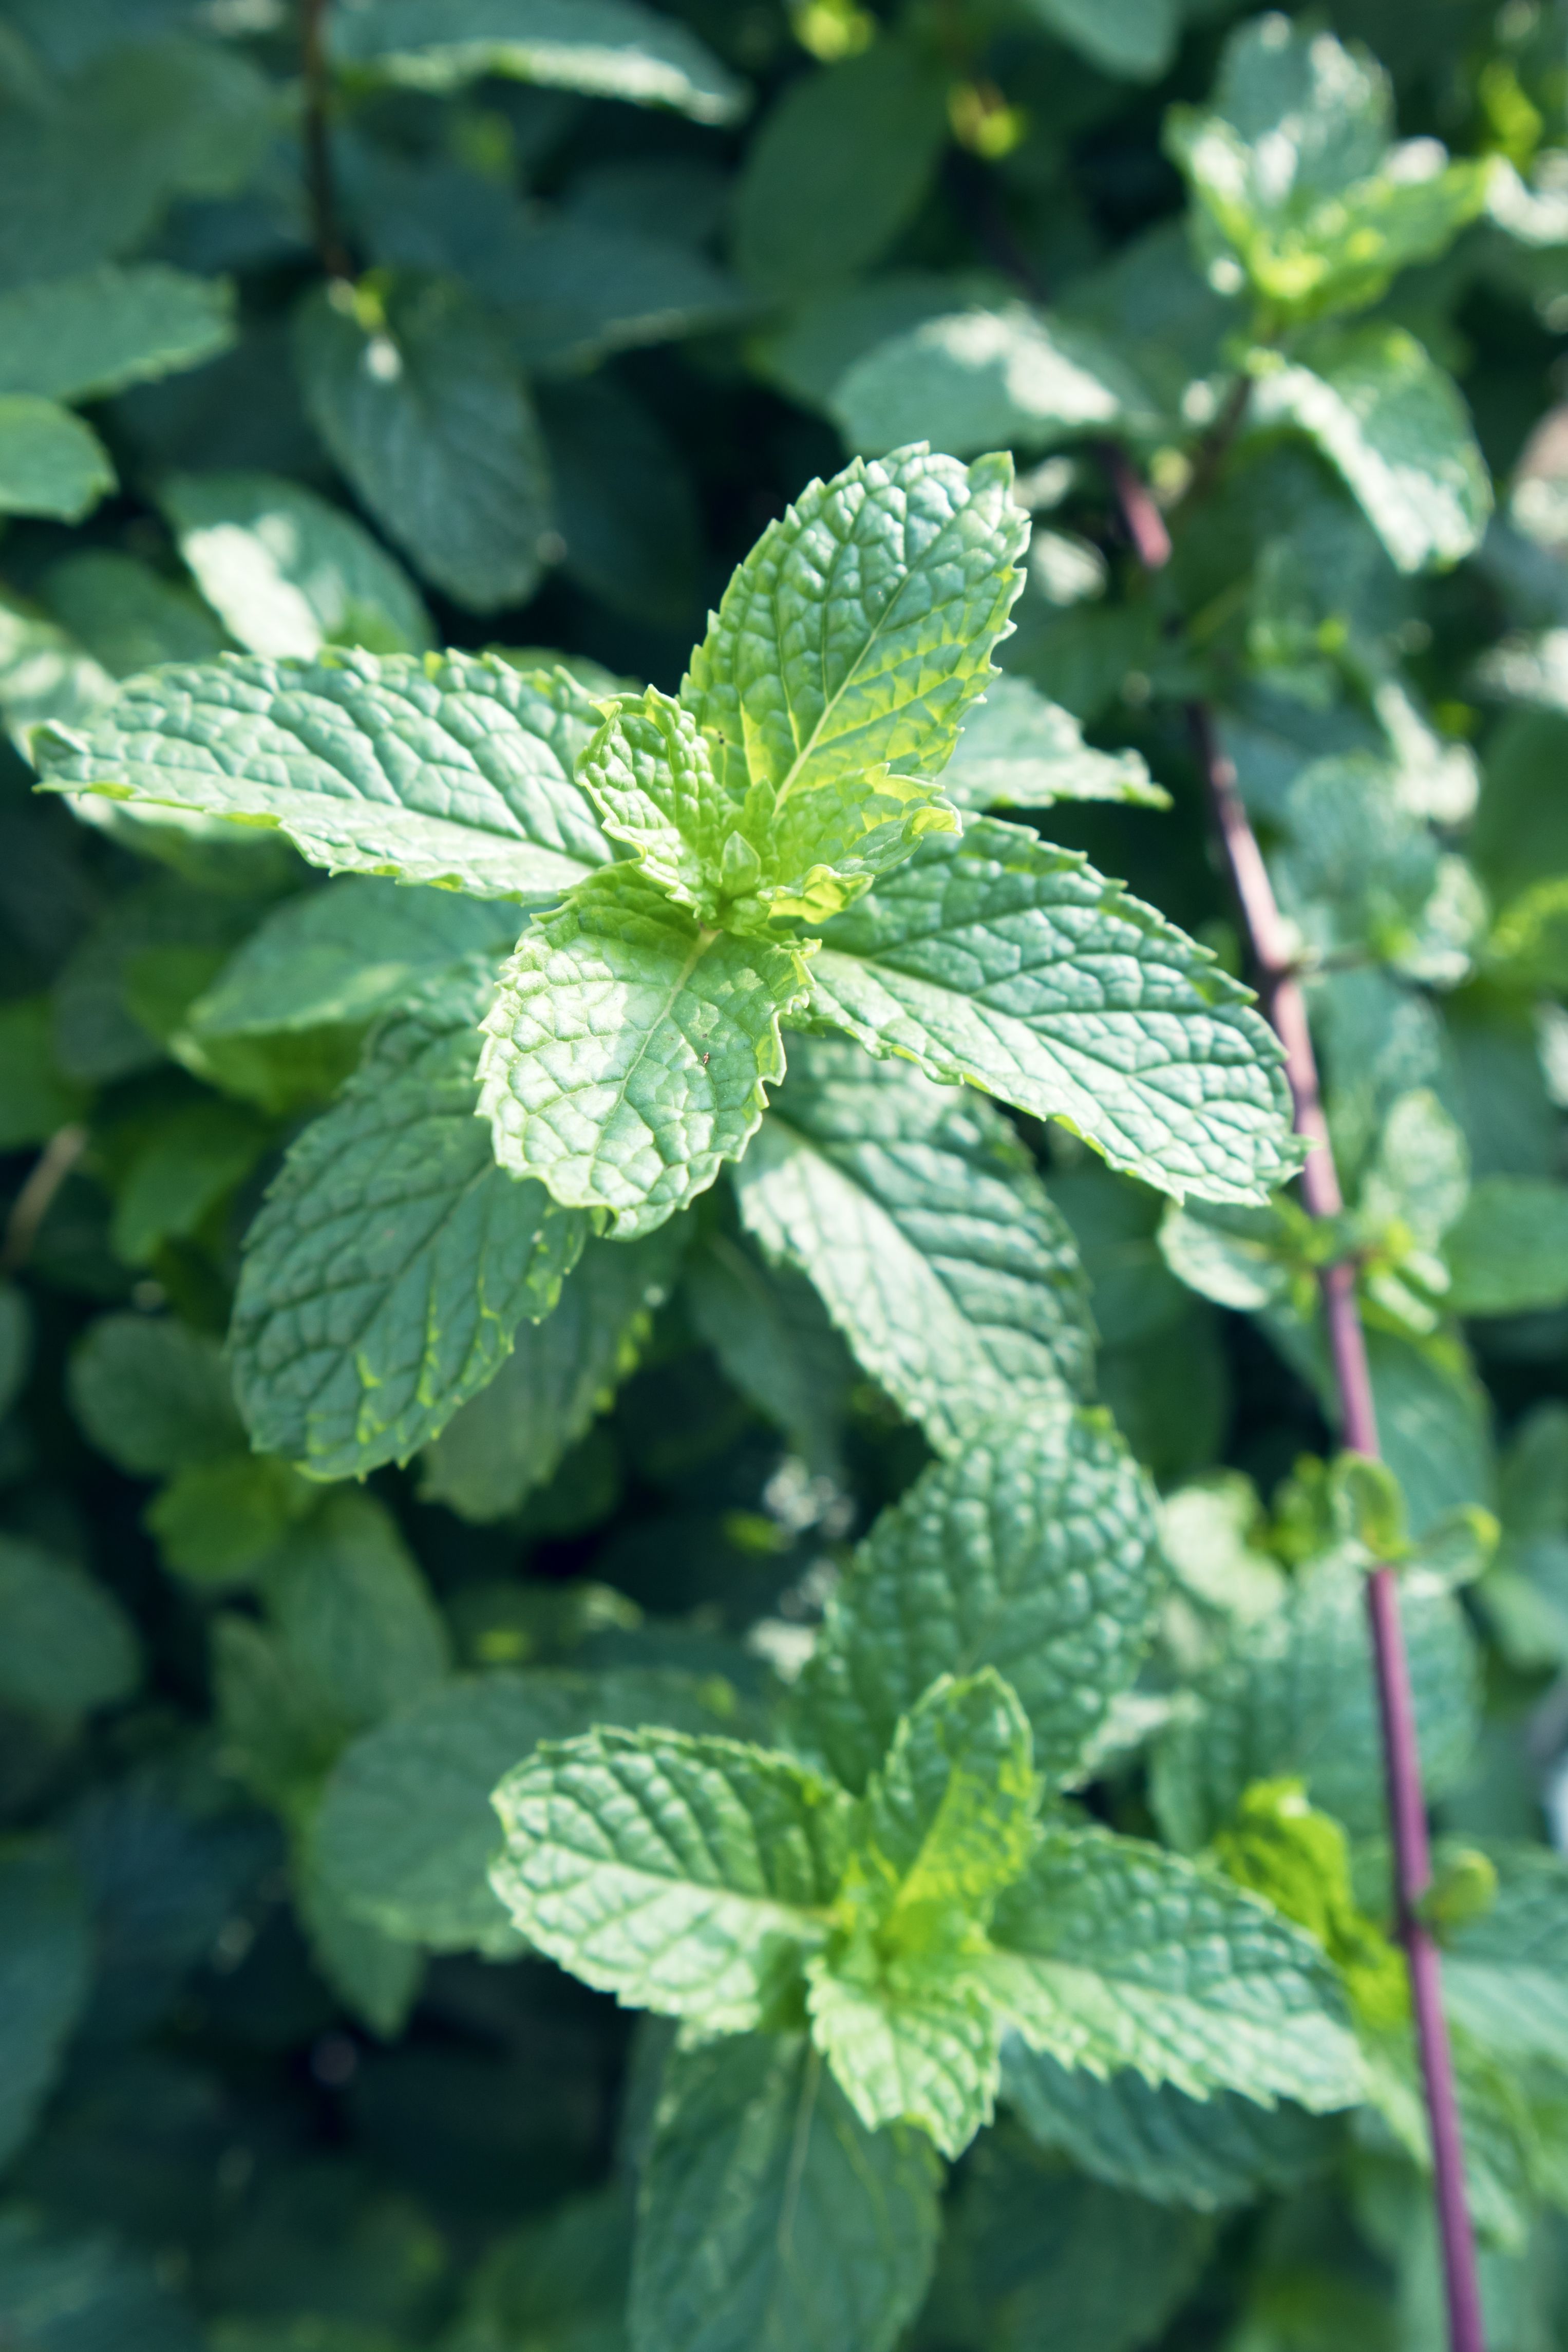 Free of mint leaves, peppermint